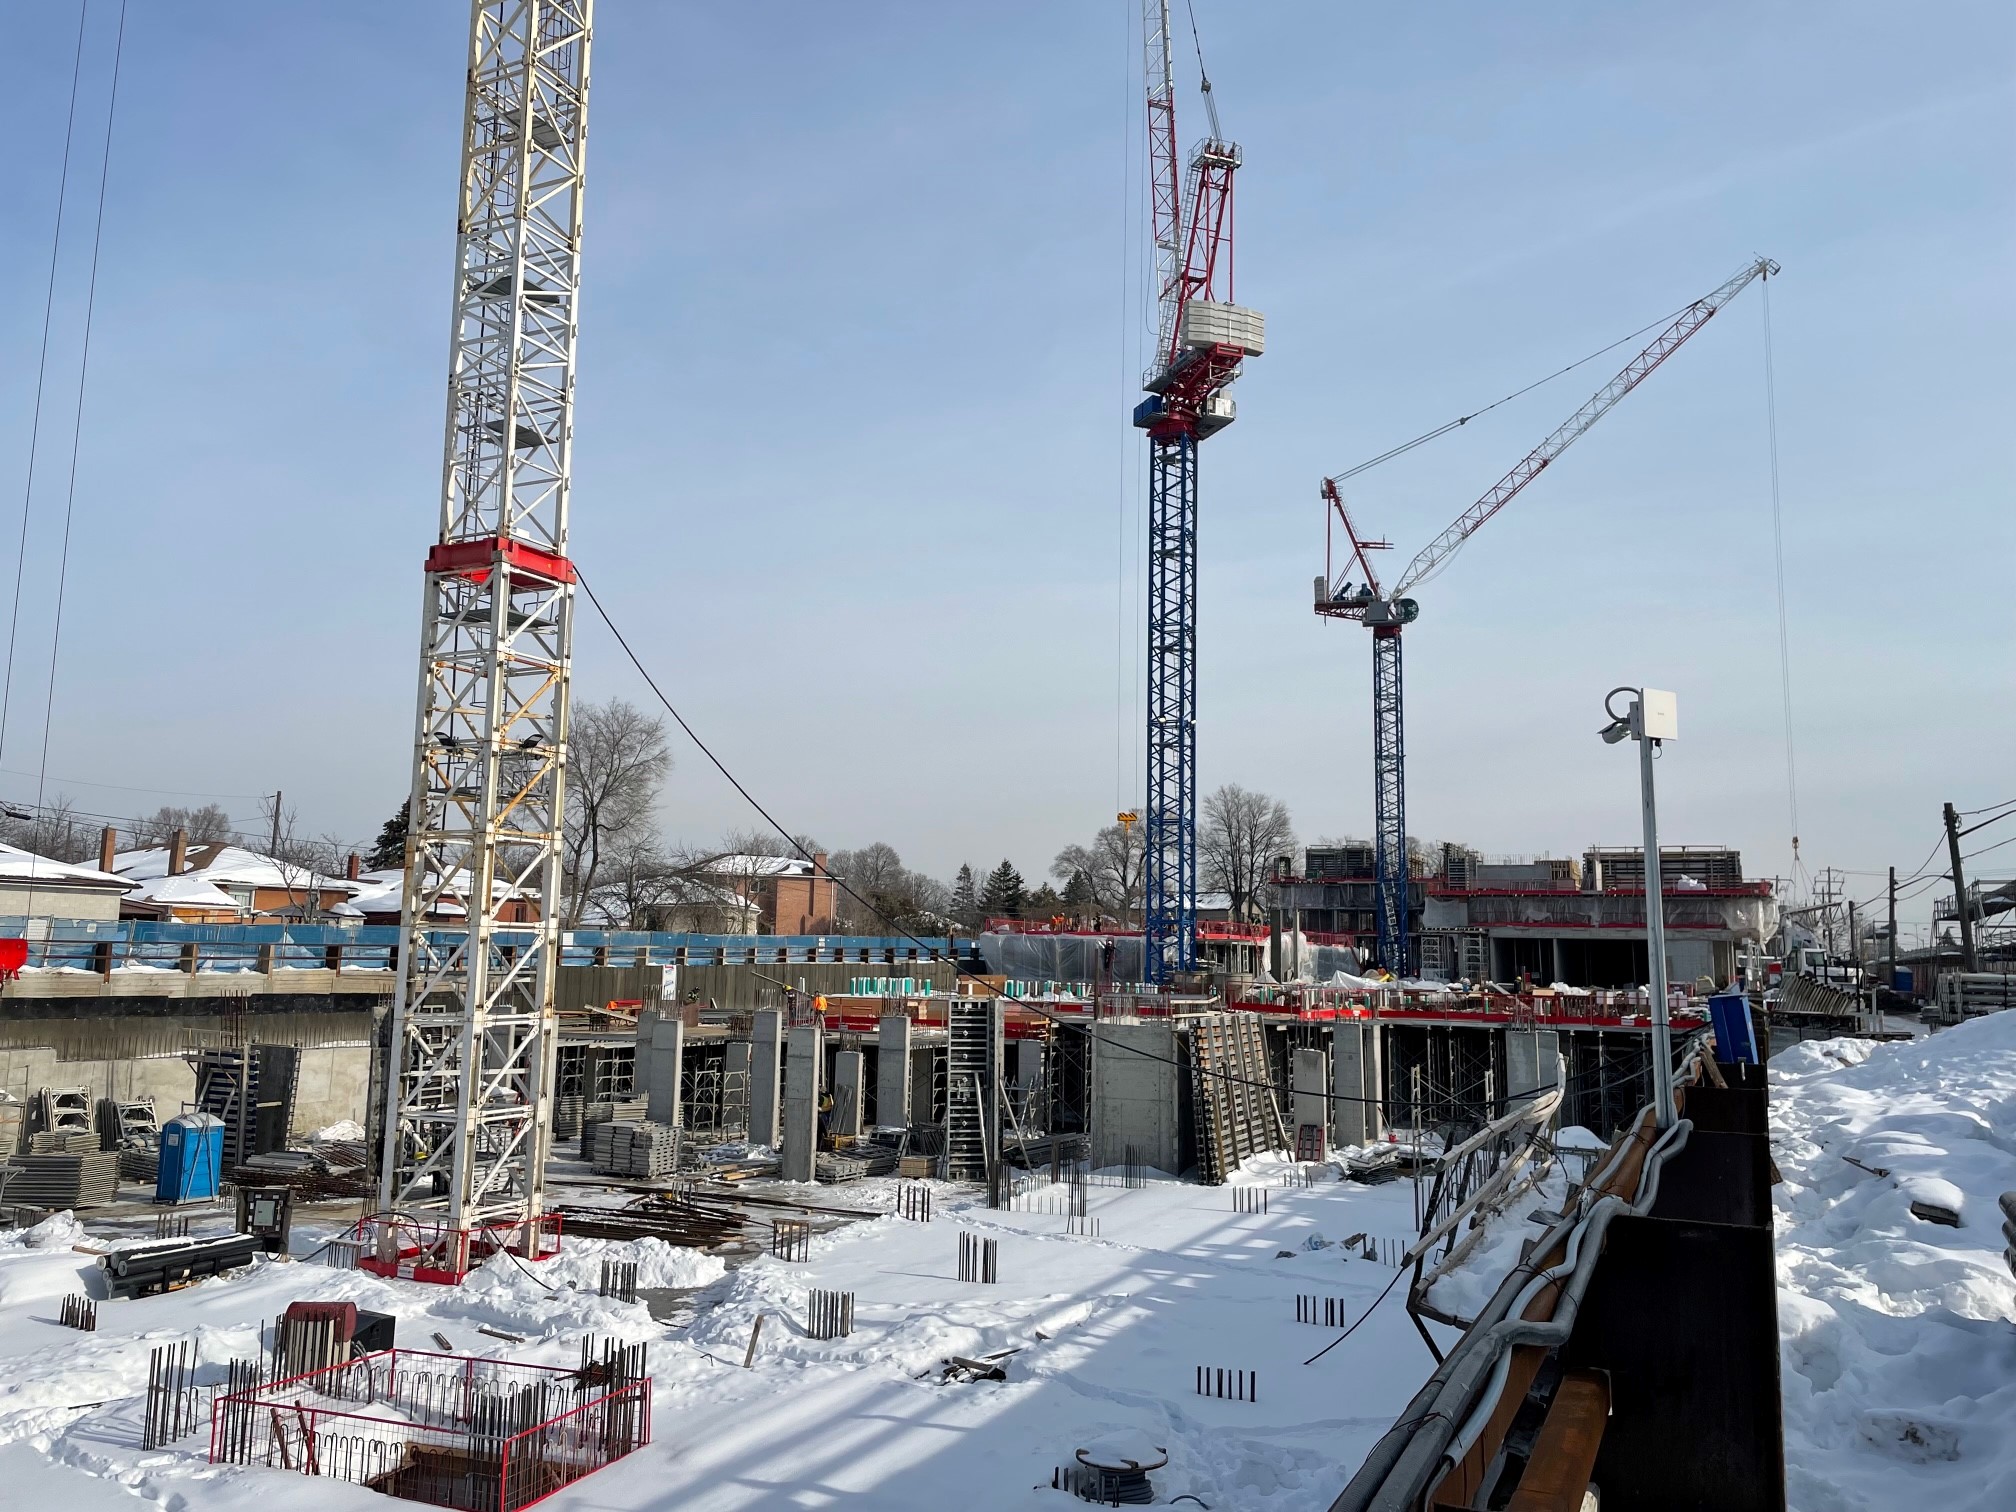 Daily Commercial News: Two Raimondi luffing jib cranes deployed for North York cluster development